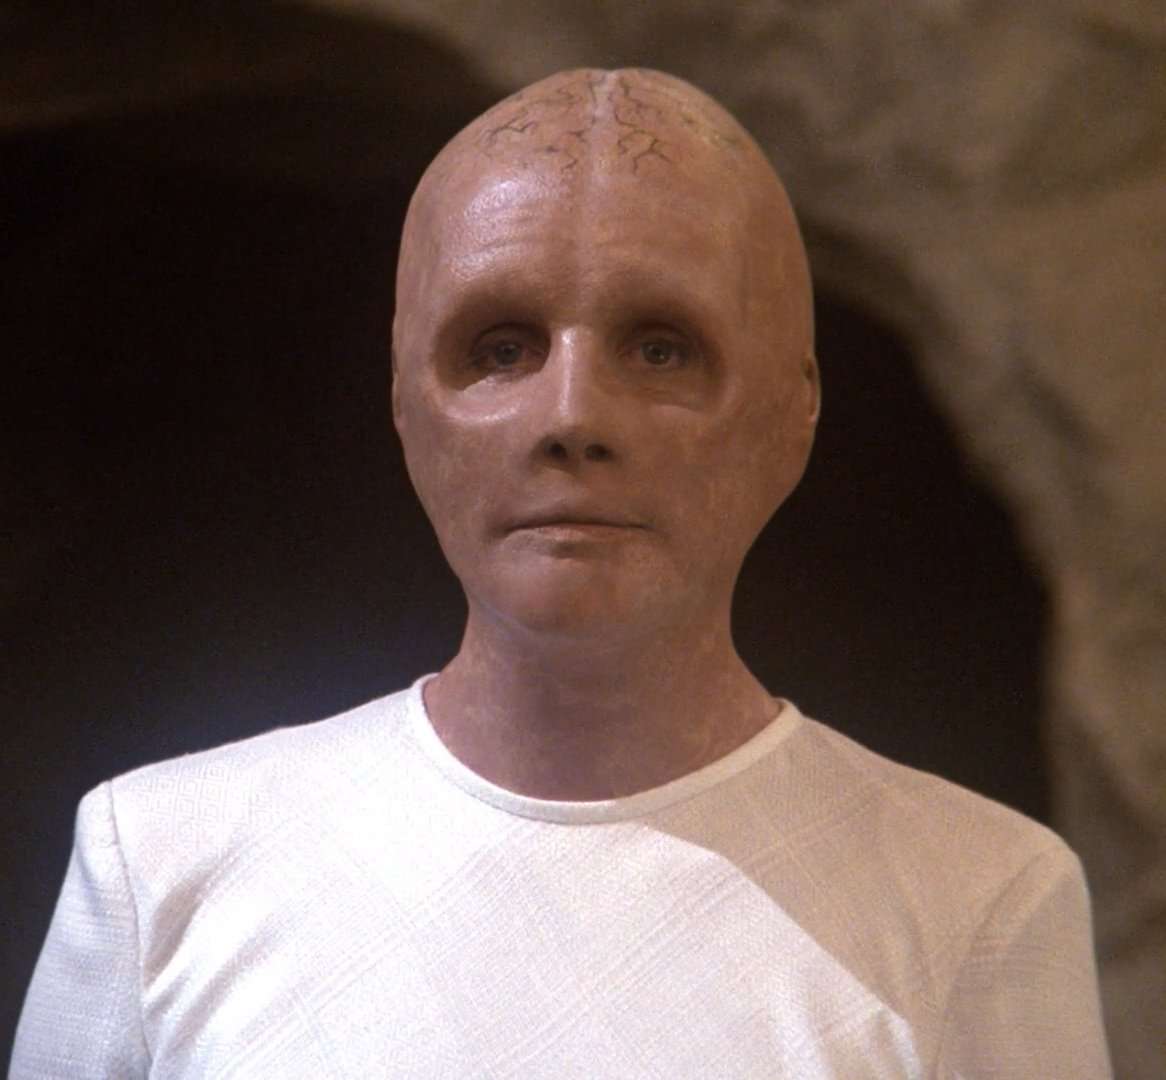 image for TIL the canonical reason for most of the alien races to be humanoid in Star Trek is an ancient humanoid species seeding the oceans of many worlds with DNA codes 4.5 billion years before the start of the series, directing the evolution of life towards a physical pattern similar to their own.